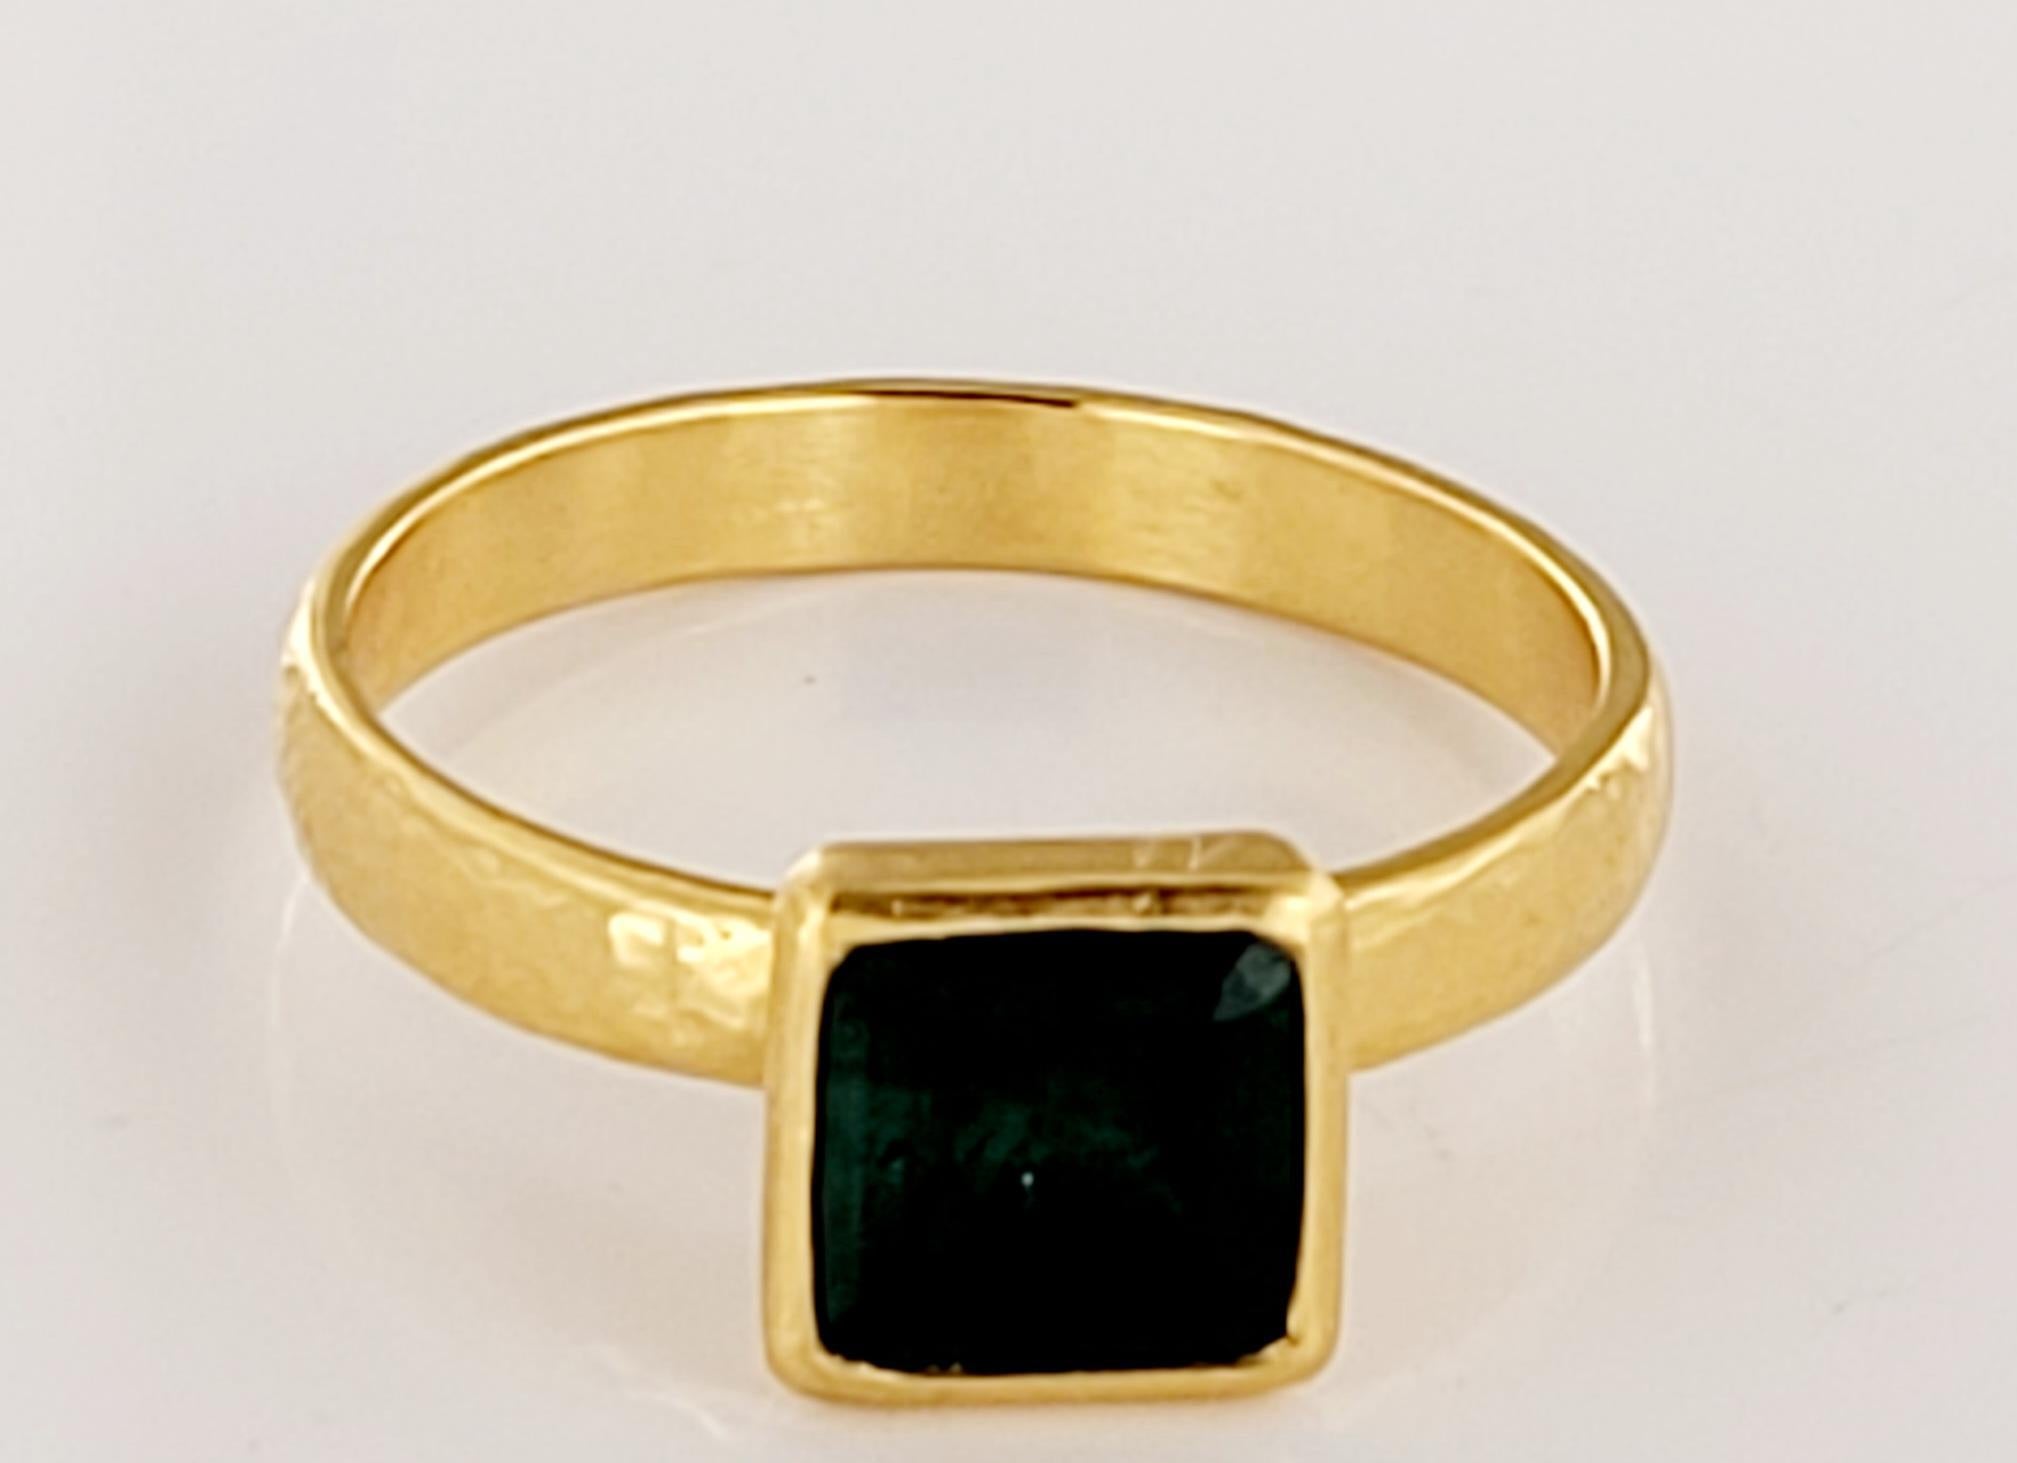 Brand: Gorhan 
Type: Ring
Material: 22K Yellow Gold 
Gemstone: Emerald
Emerald:1.8ct
Stone cut: Princess cut 
Ring Size :7
Ring Weight: 3.7gr
Measurement: 7.5X7.5mm
Ring thickness measures: 2.8mm
Condition: New, never worn